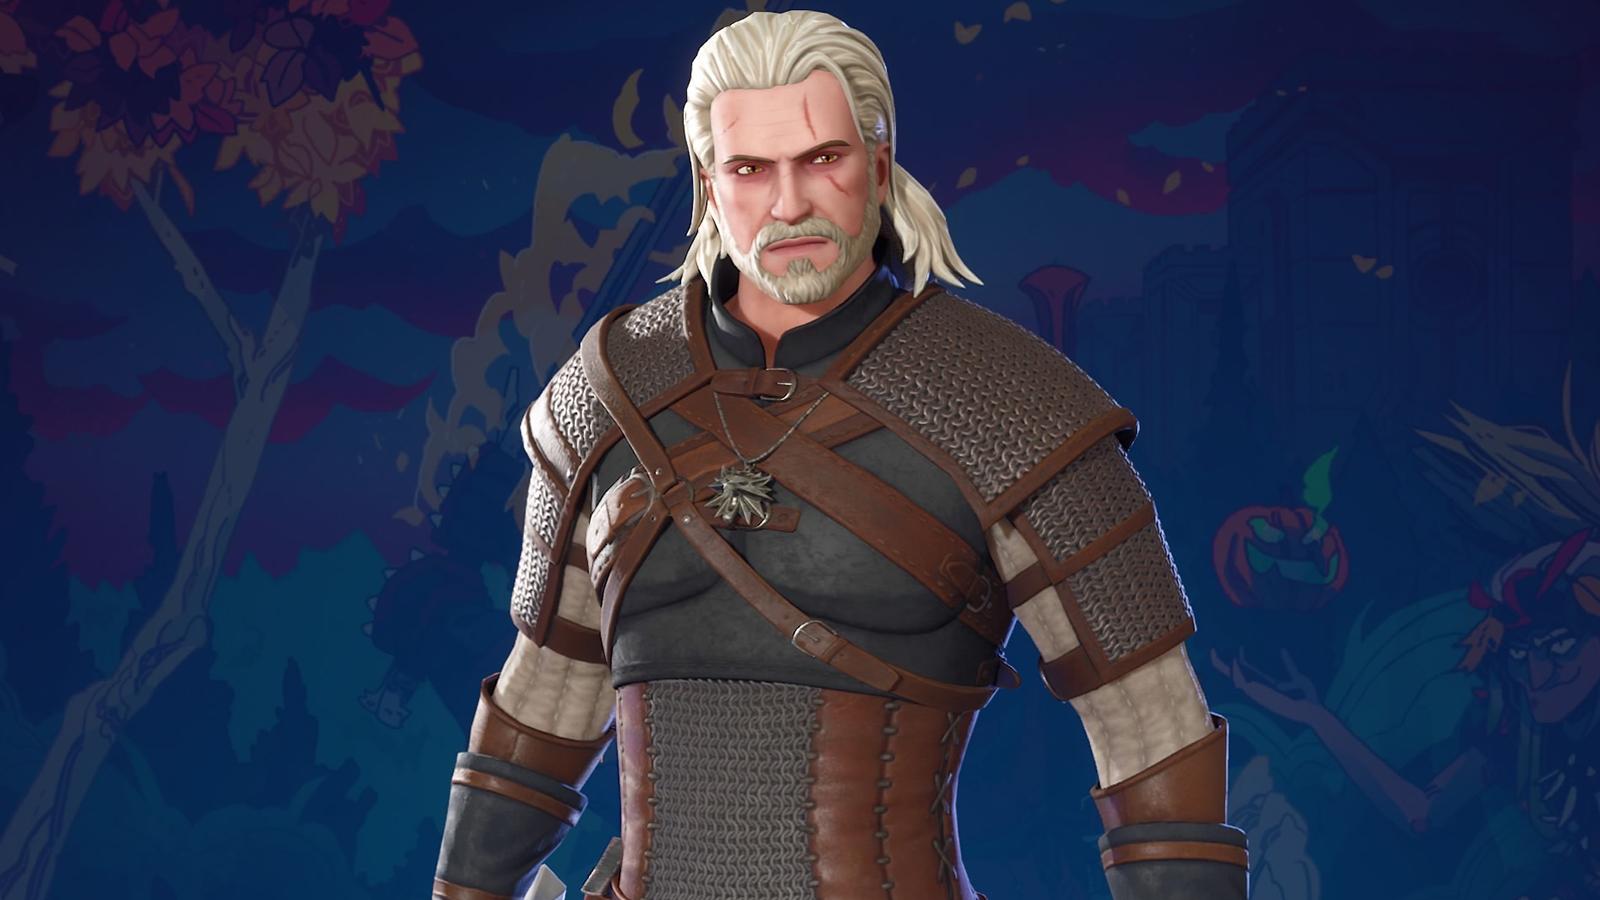 The Witcher's Geralt of Rivia skin in Fortnite